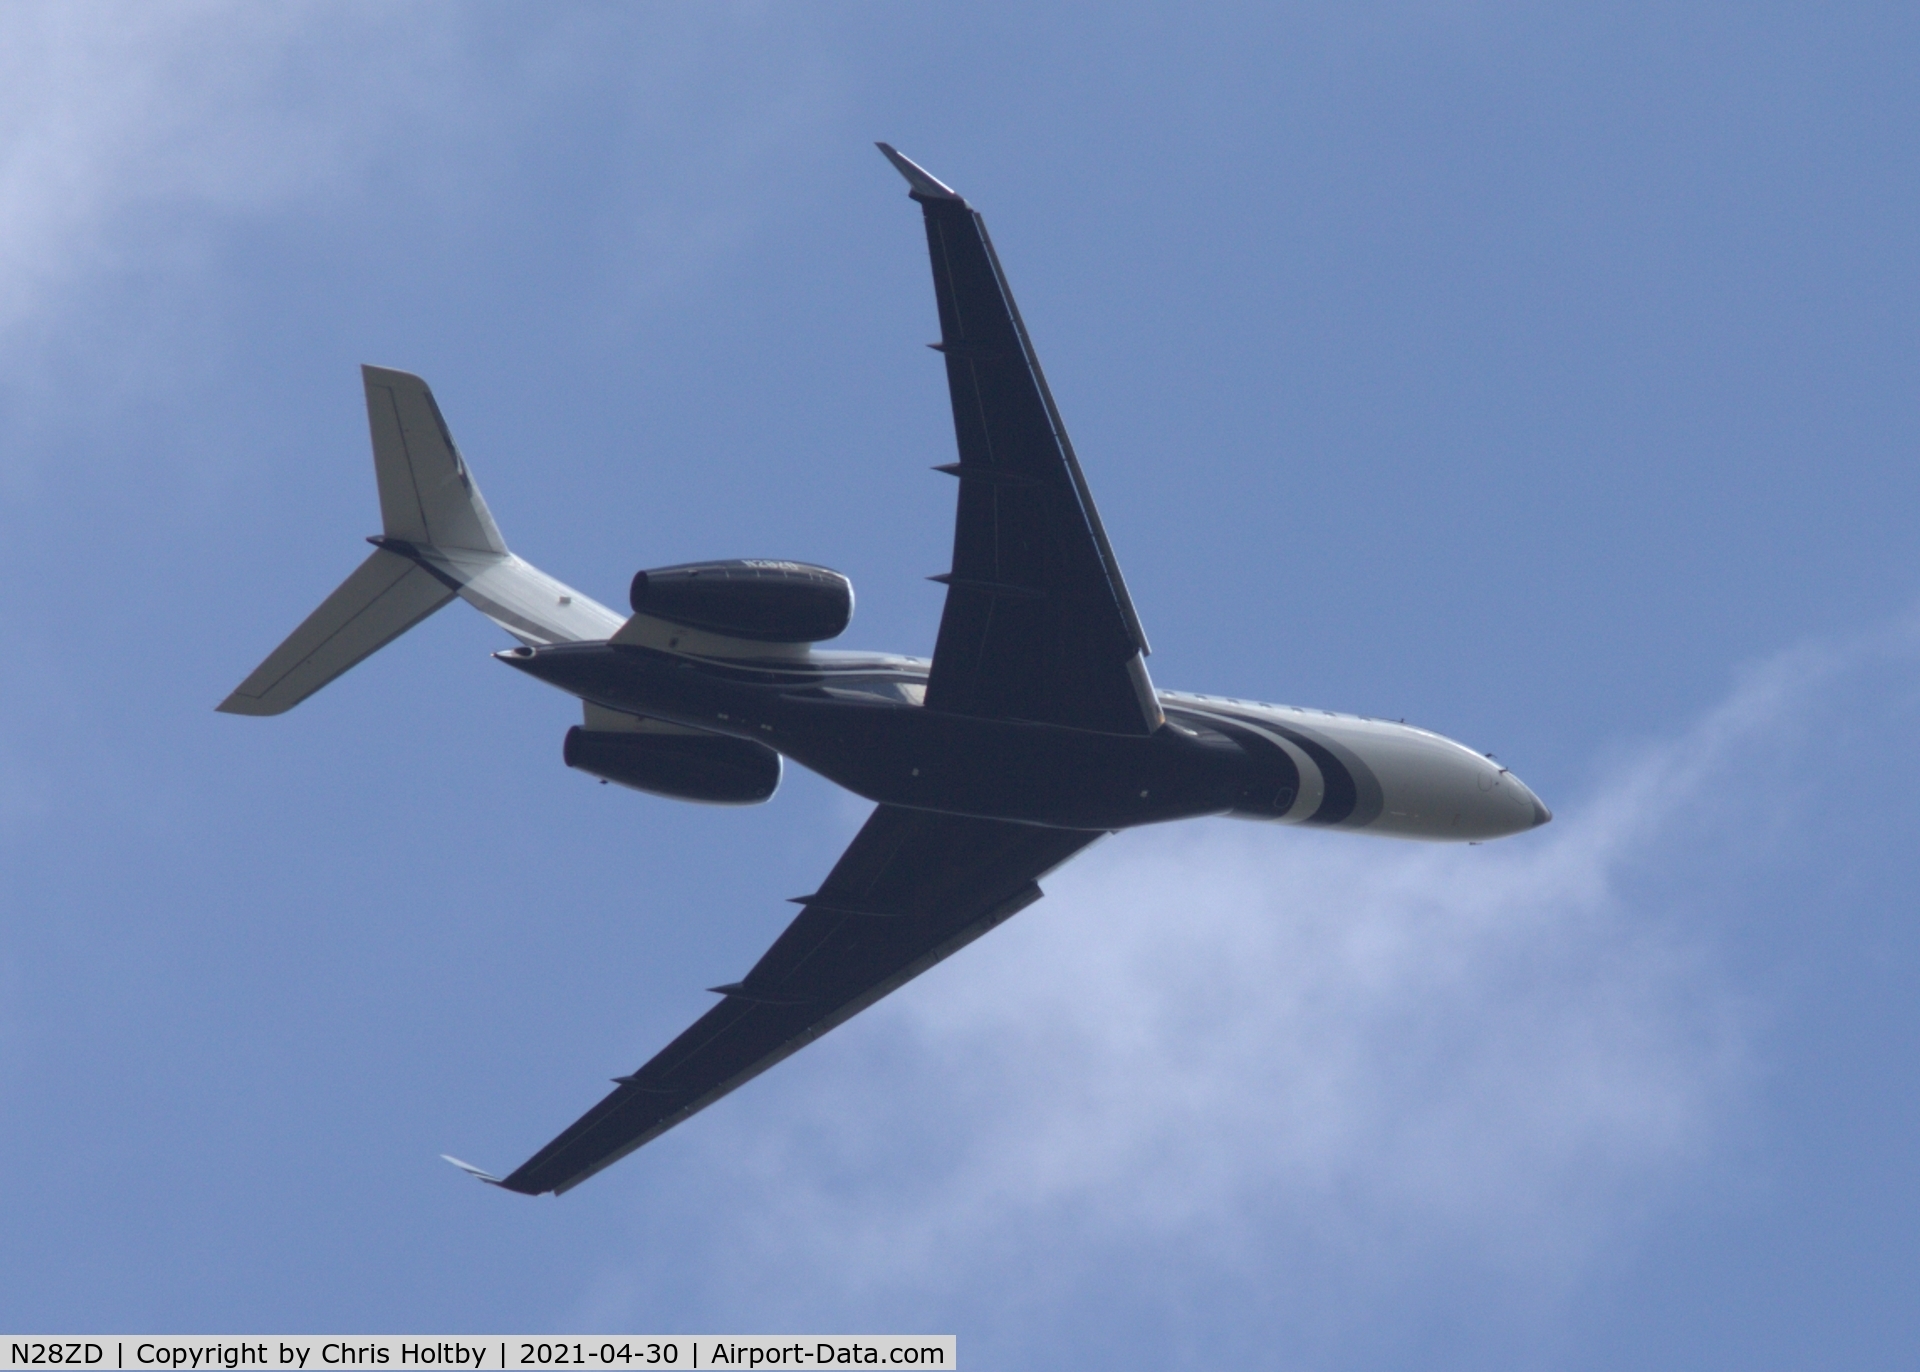 N28ZD, 2006 Bombardier BD-700-1A10 Global Express C/N 9191, Past Amwell, Herts & into London Stansted